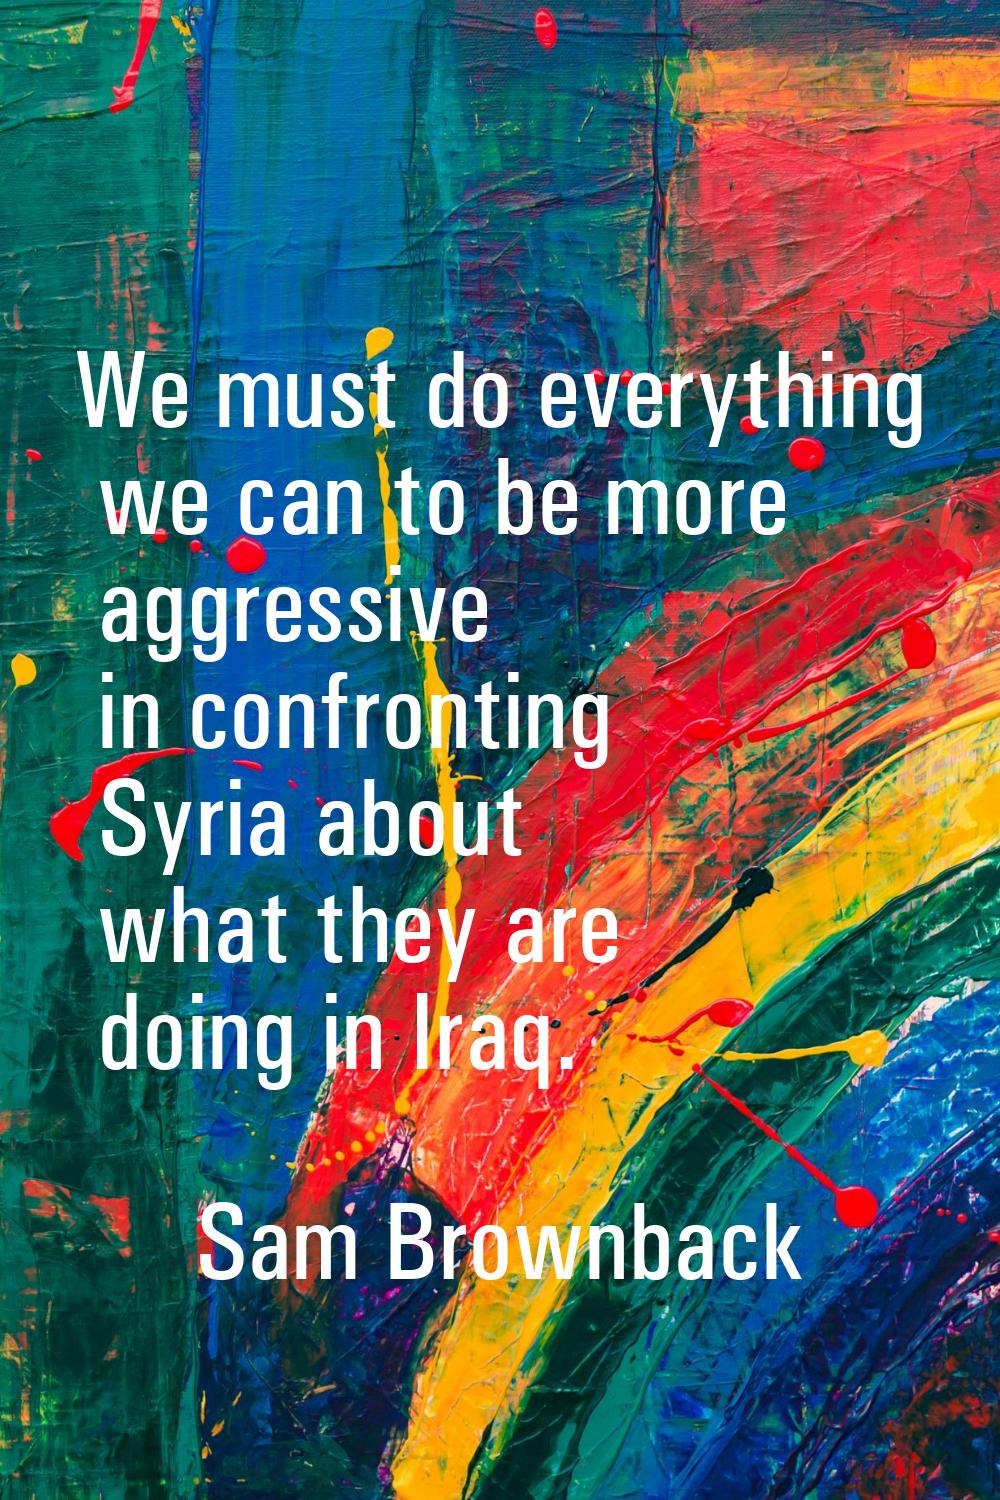 We must do everything we can to be more aggressive in confronting Syria about what they are doing i